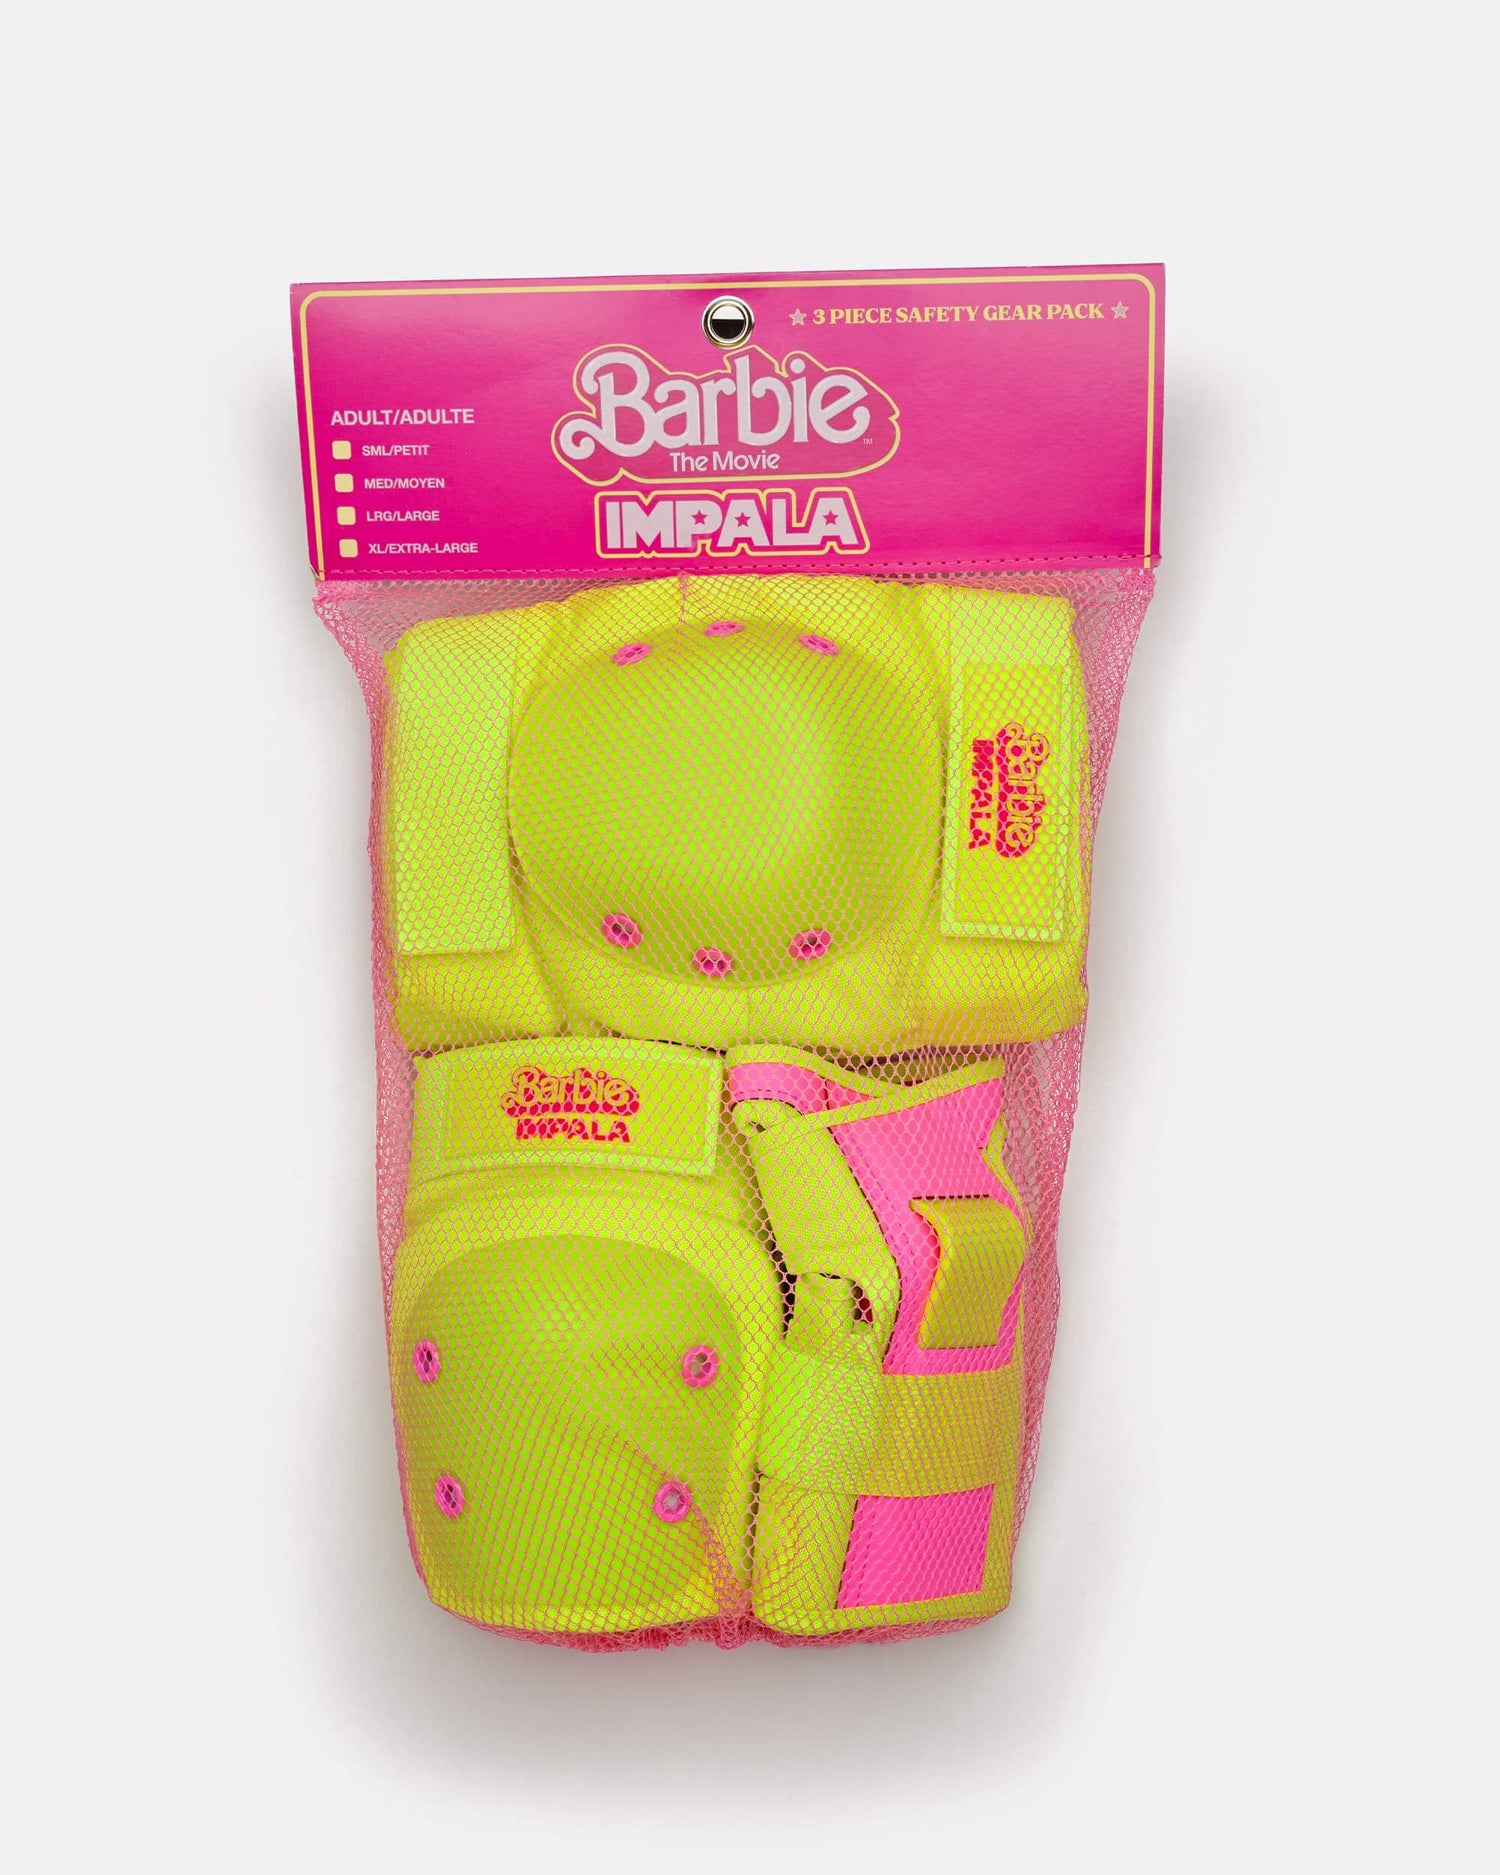 Impala Adult Protective Pack - Barbie Bright Yellow